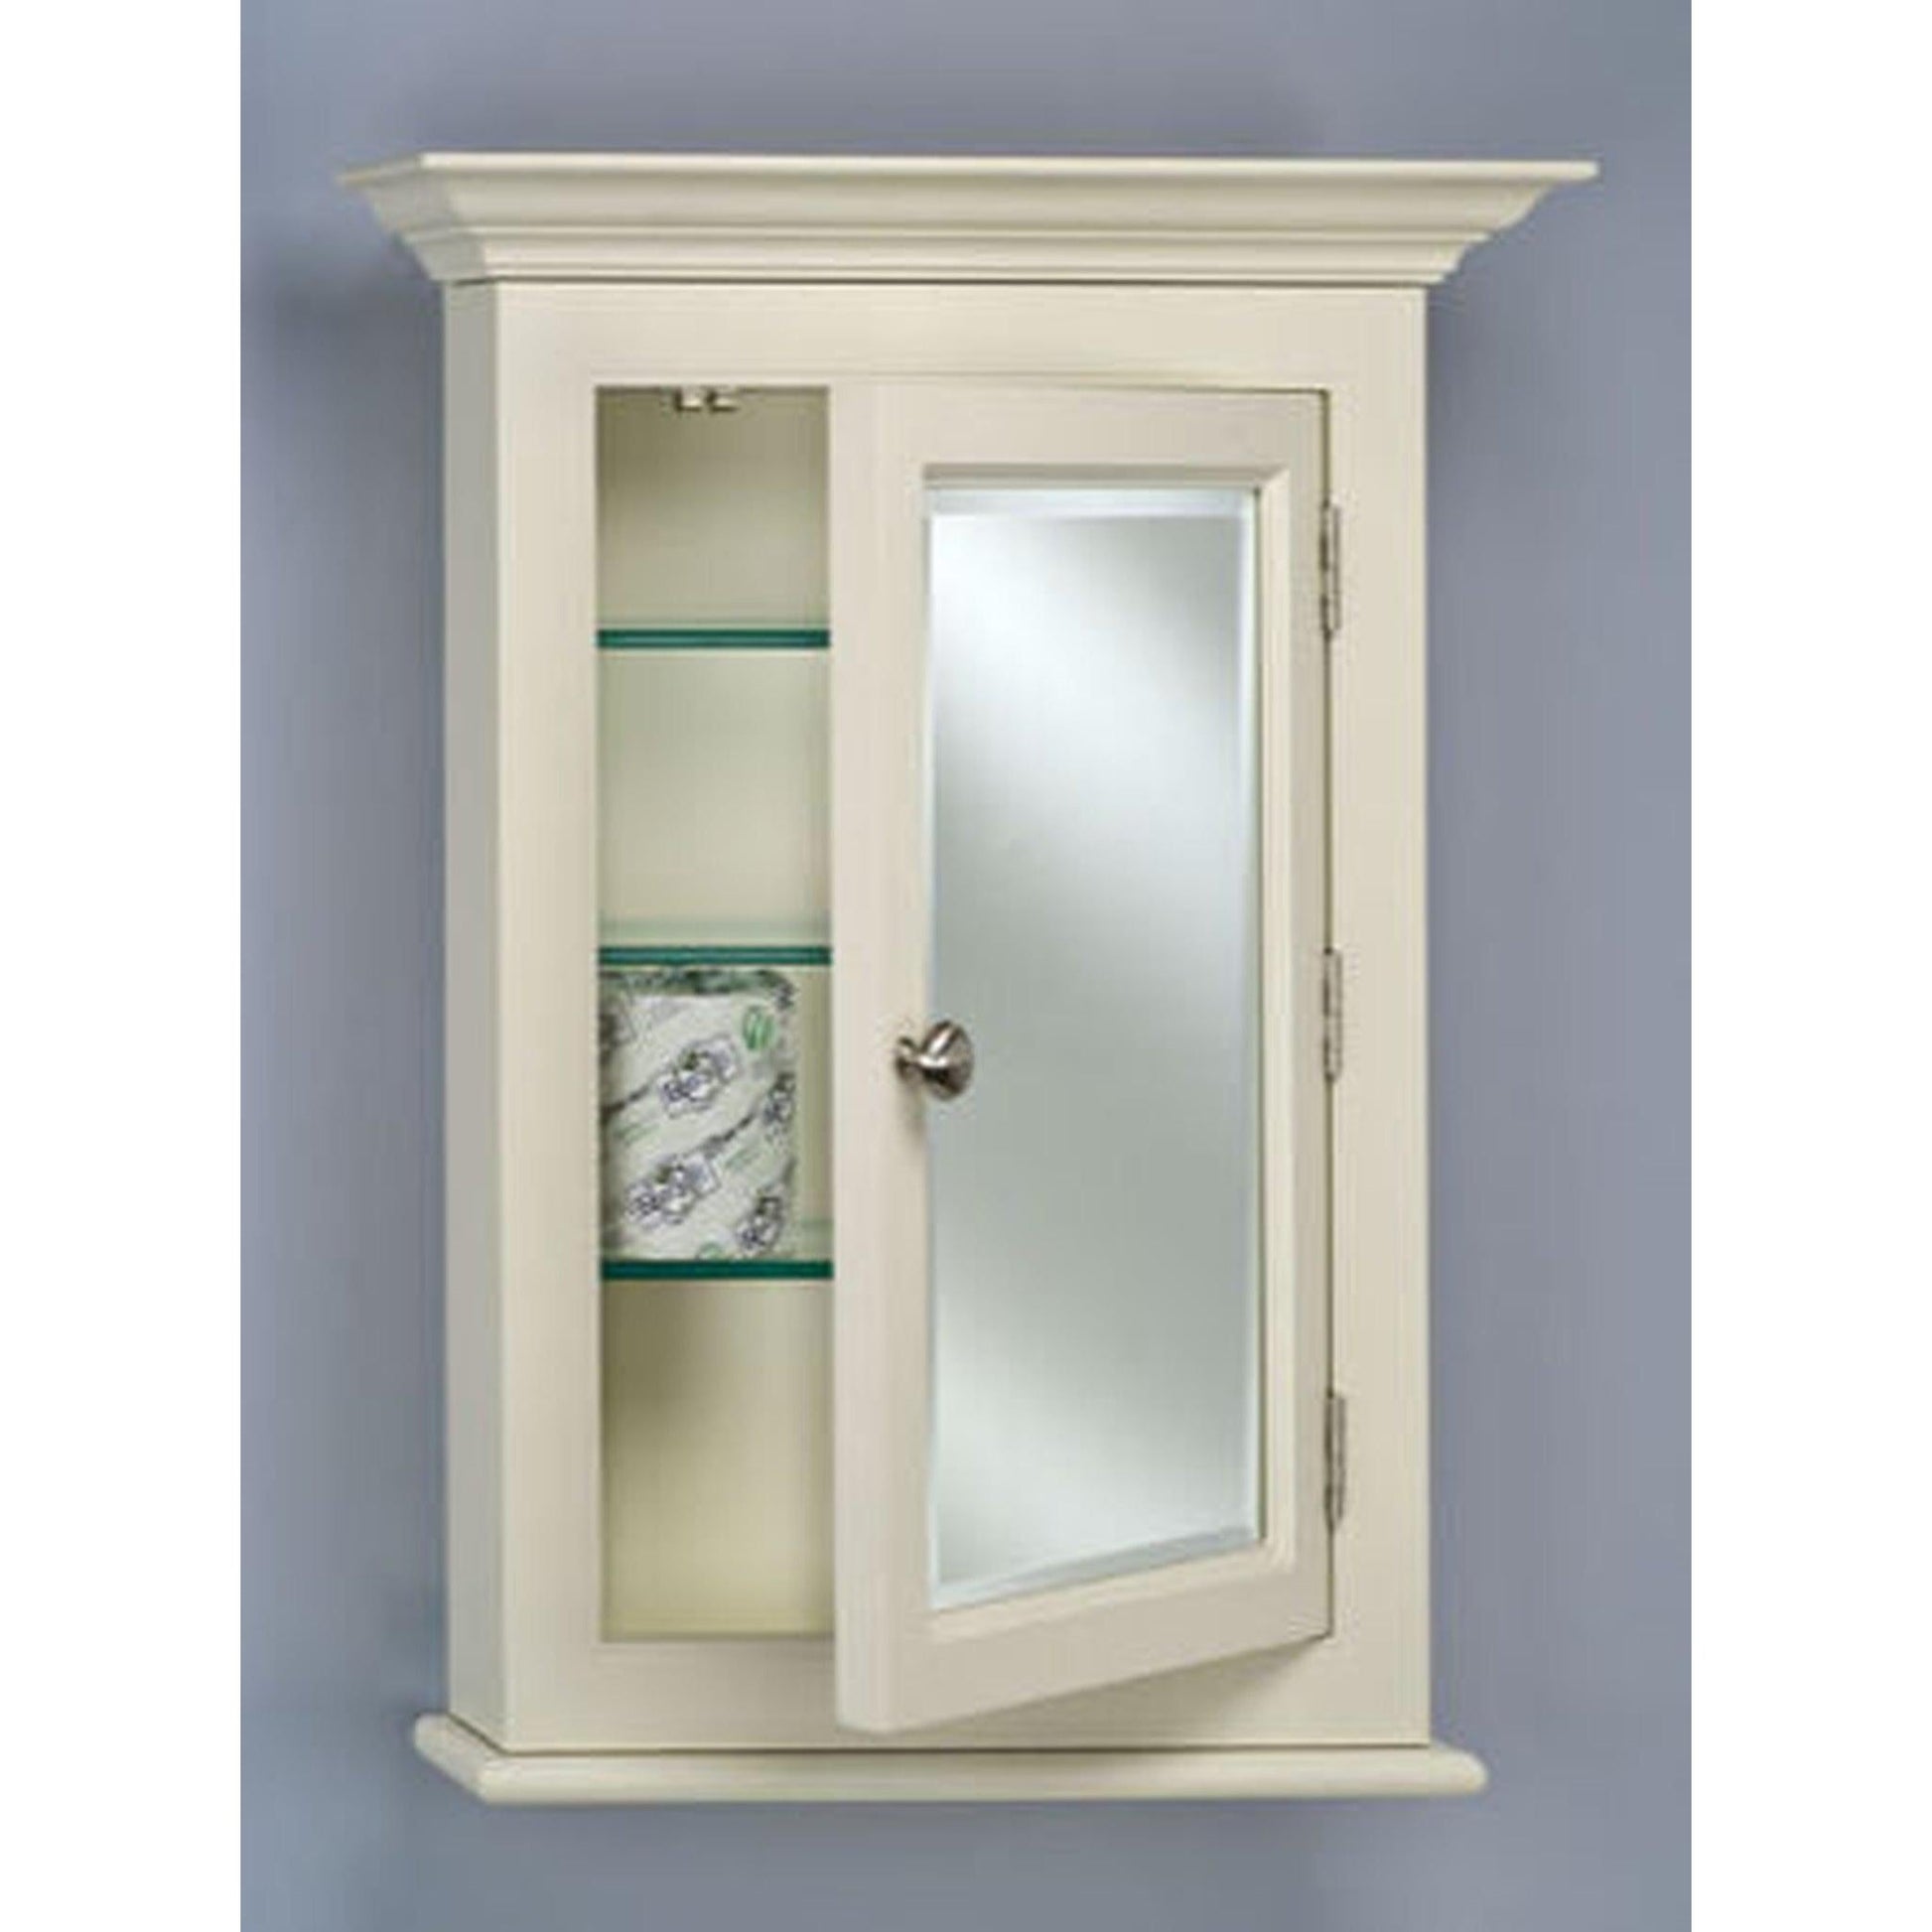 Afina Wilshire II Small Biscuit Semi-Recessed Right Hinged Single Door Medicine Cabinet With Beveled Edge Mirror